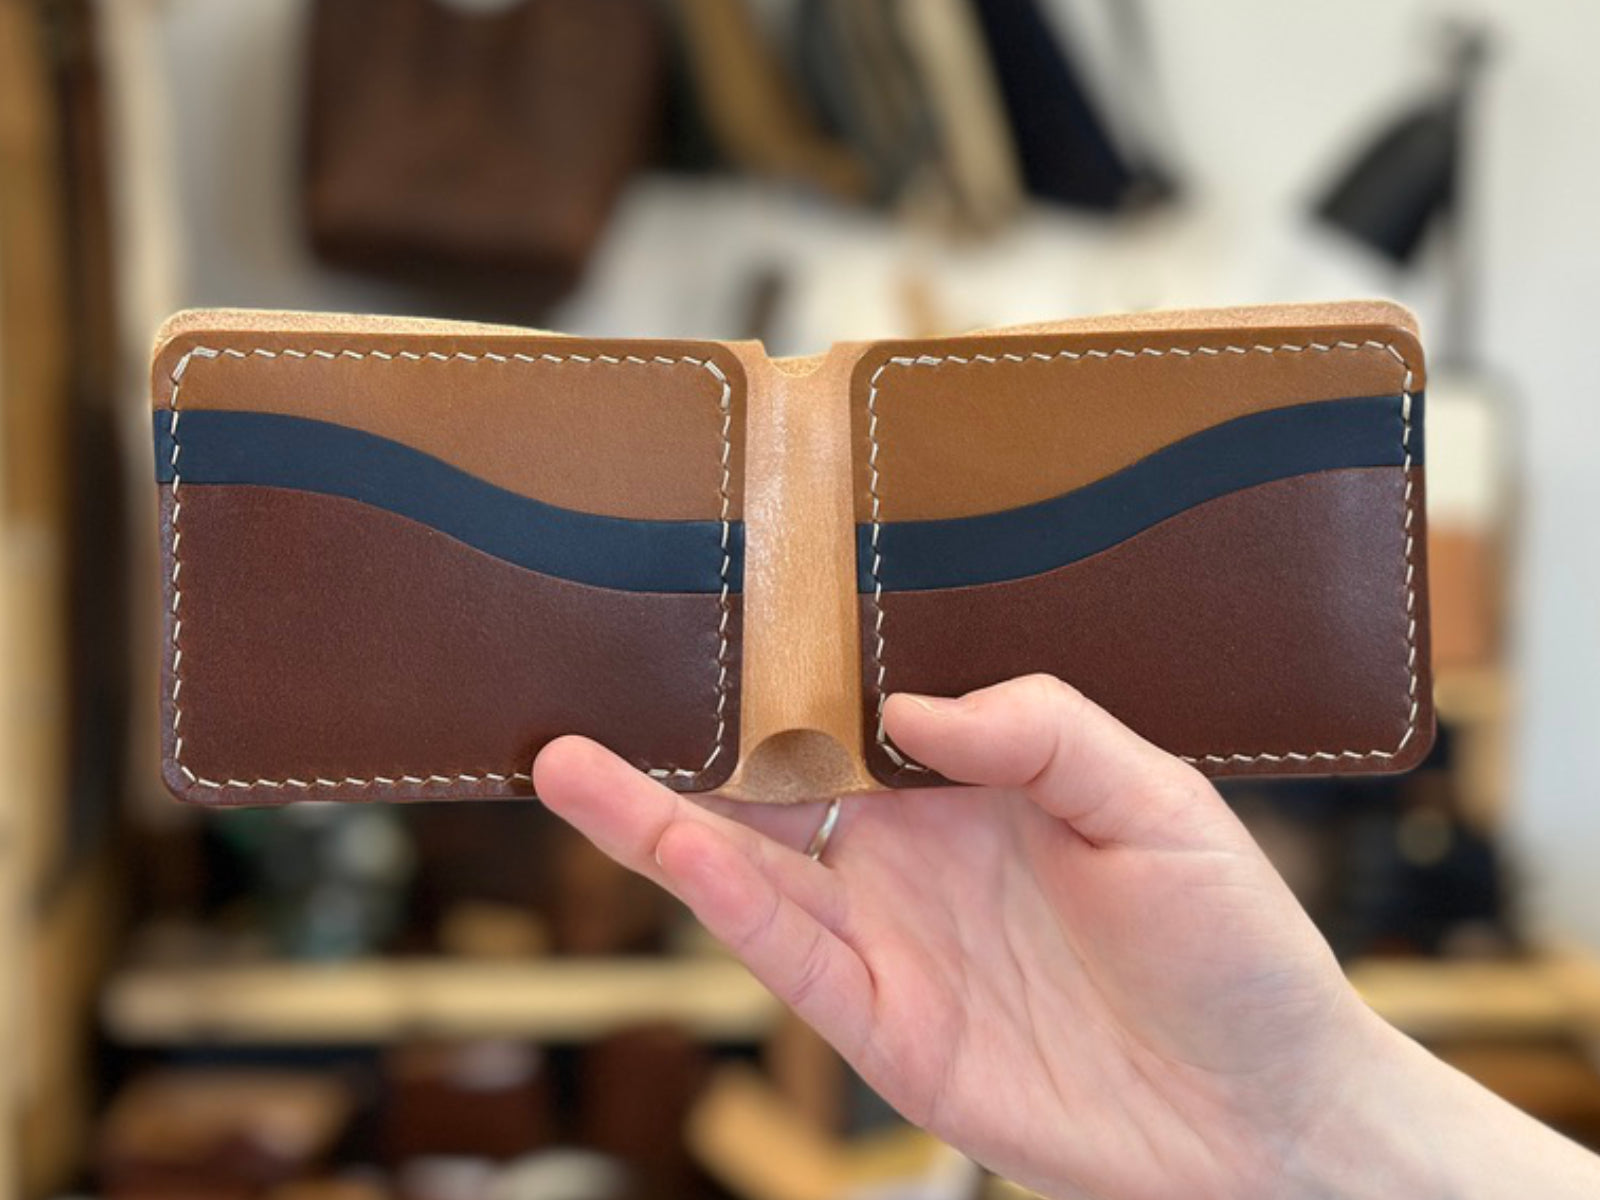 Build your own custom leather bucklaw wallet in brown, navy and tan